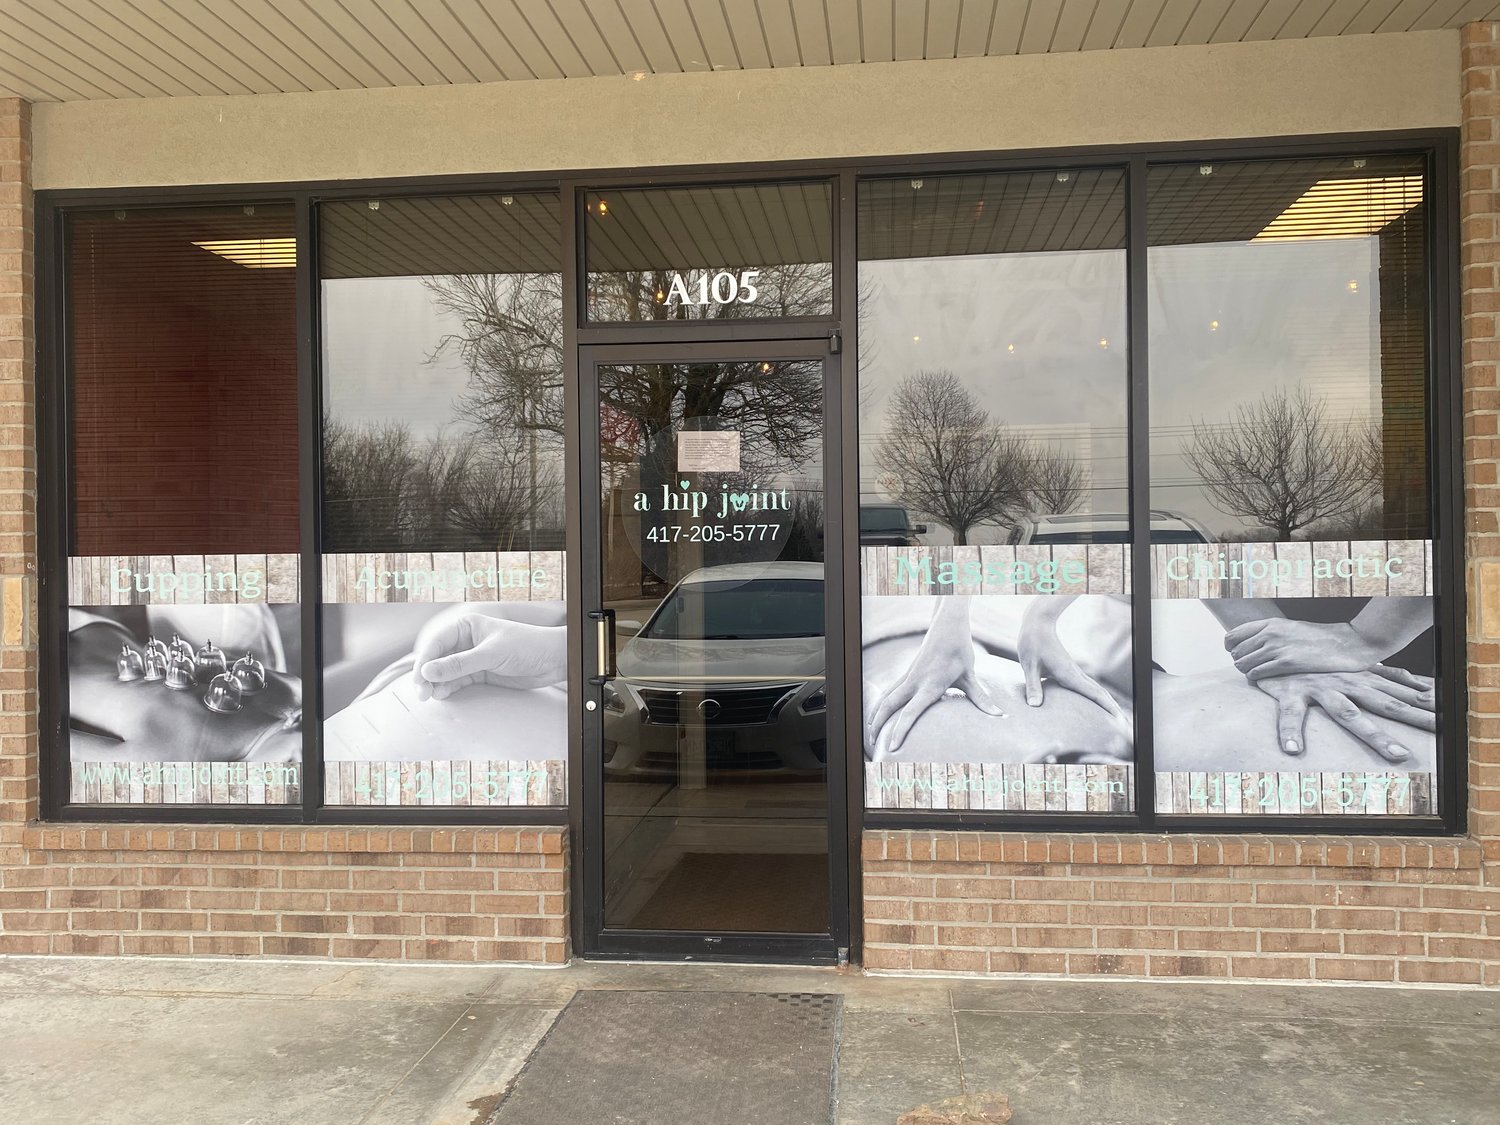 Chiropractor and massage clinic A hip joint Nixa LLC is open at 380 E. Highway CC, Ste. A105.